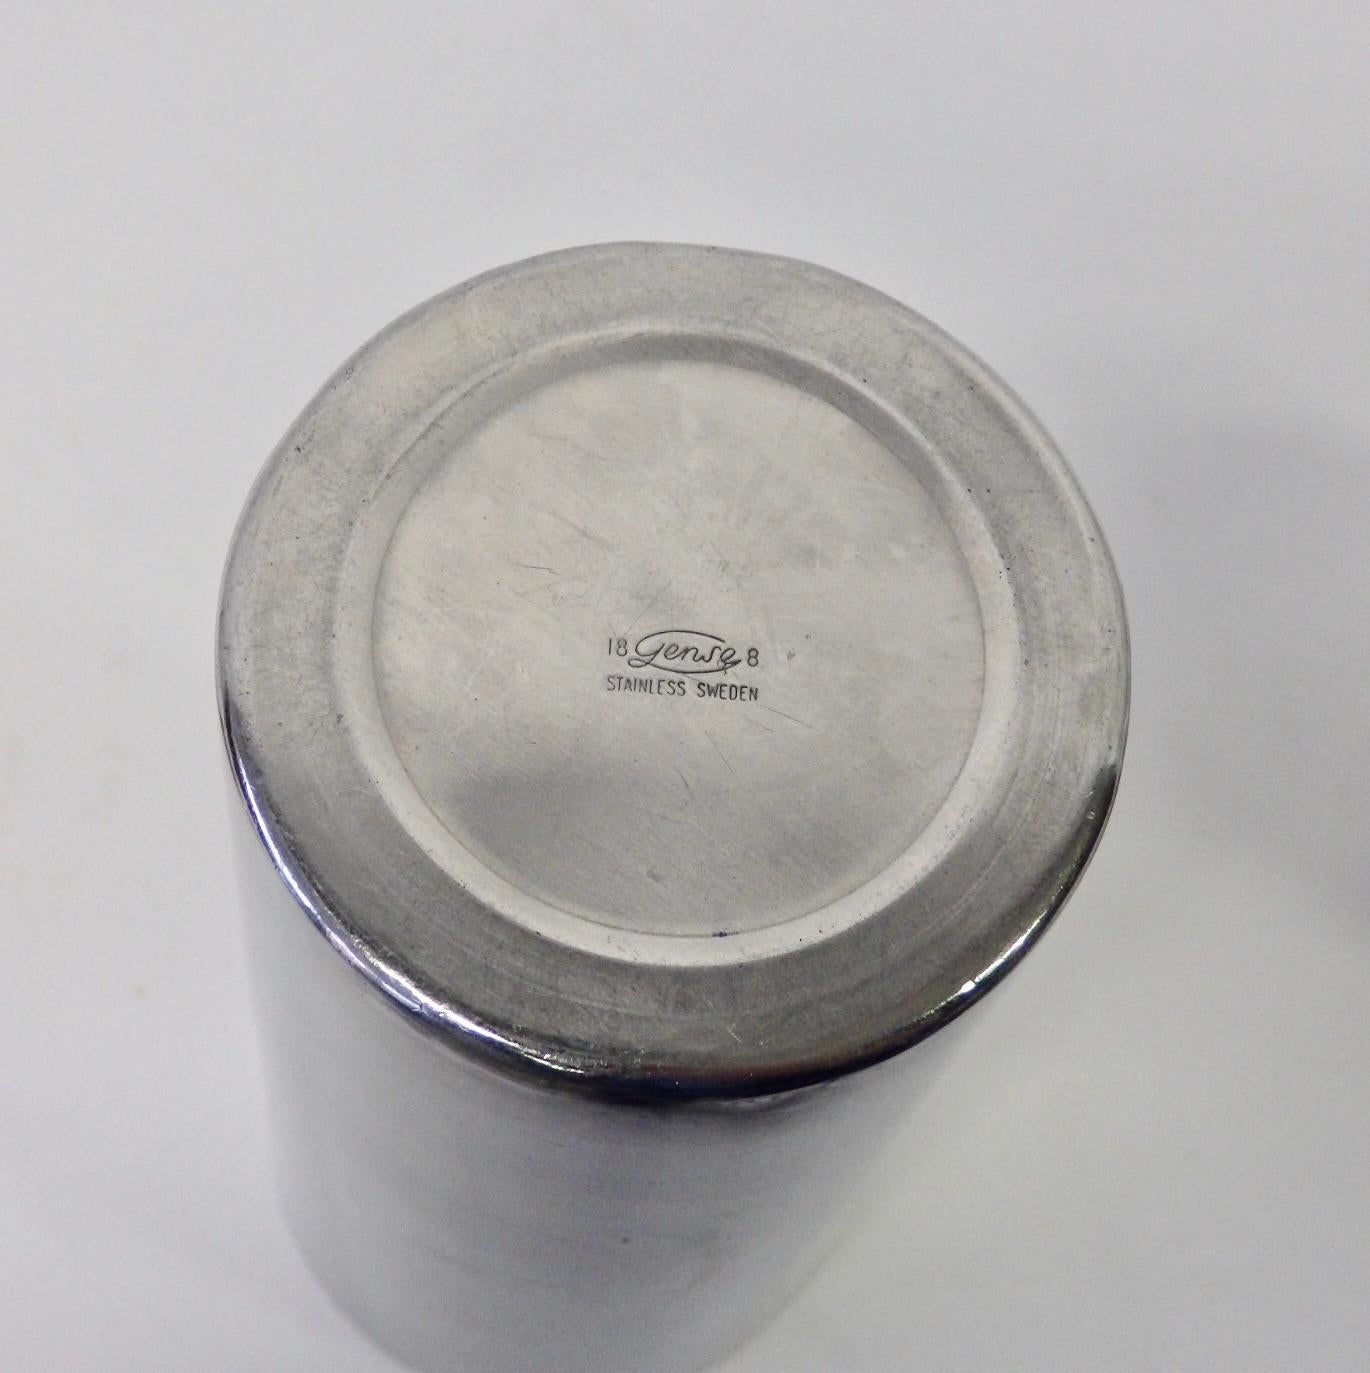 Made in Sweden Stainless Steel Cocktail Shaker In Good Condition For Sale In Ferndale, MI